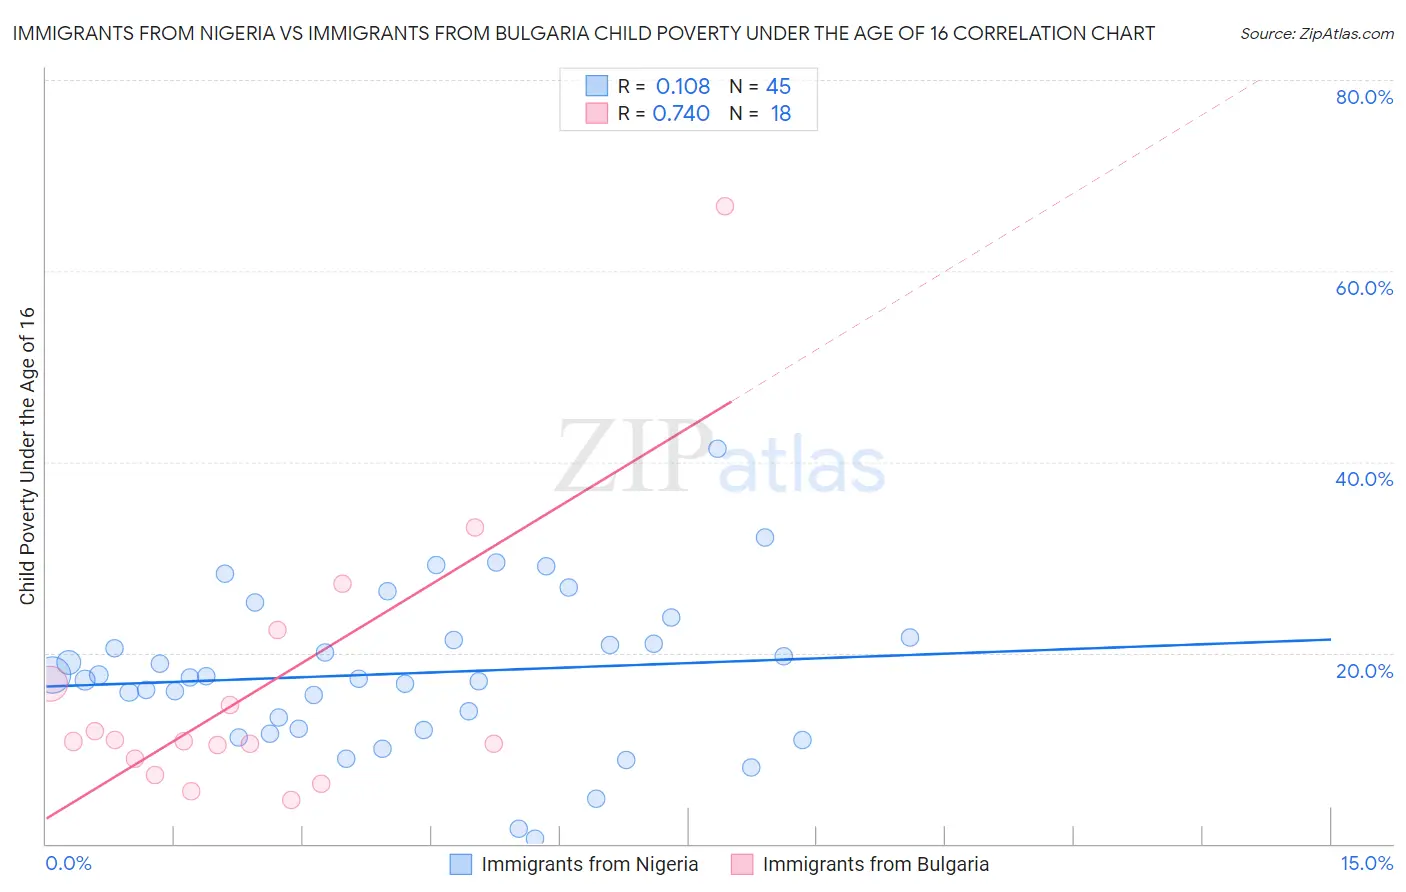 Immigrants from Nigeria vs Immigrants from Bulgaria Child Poverty Under the Age of 16